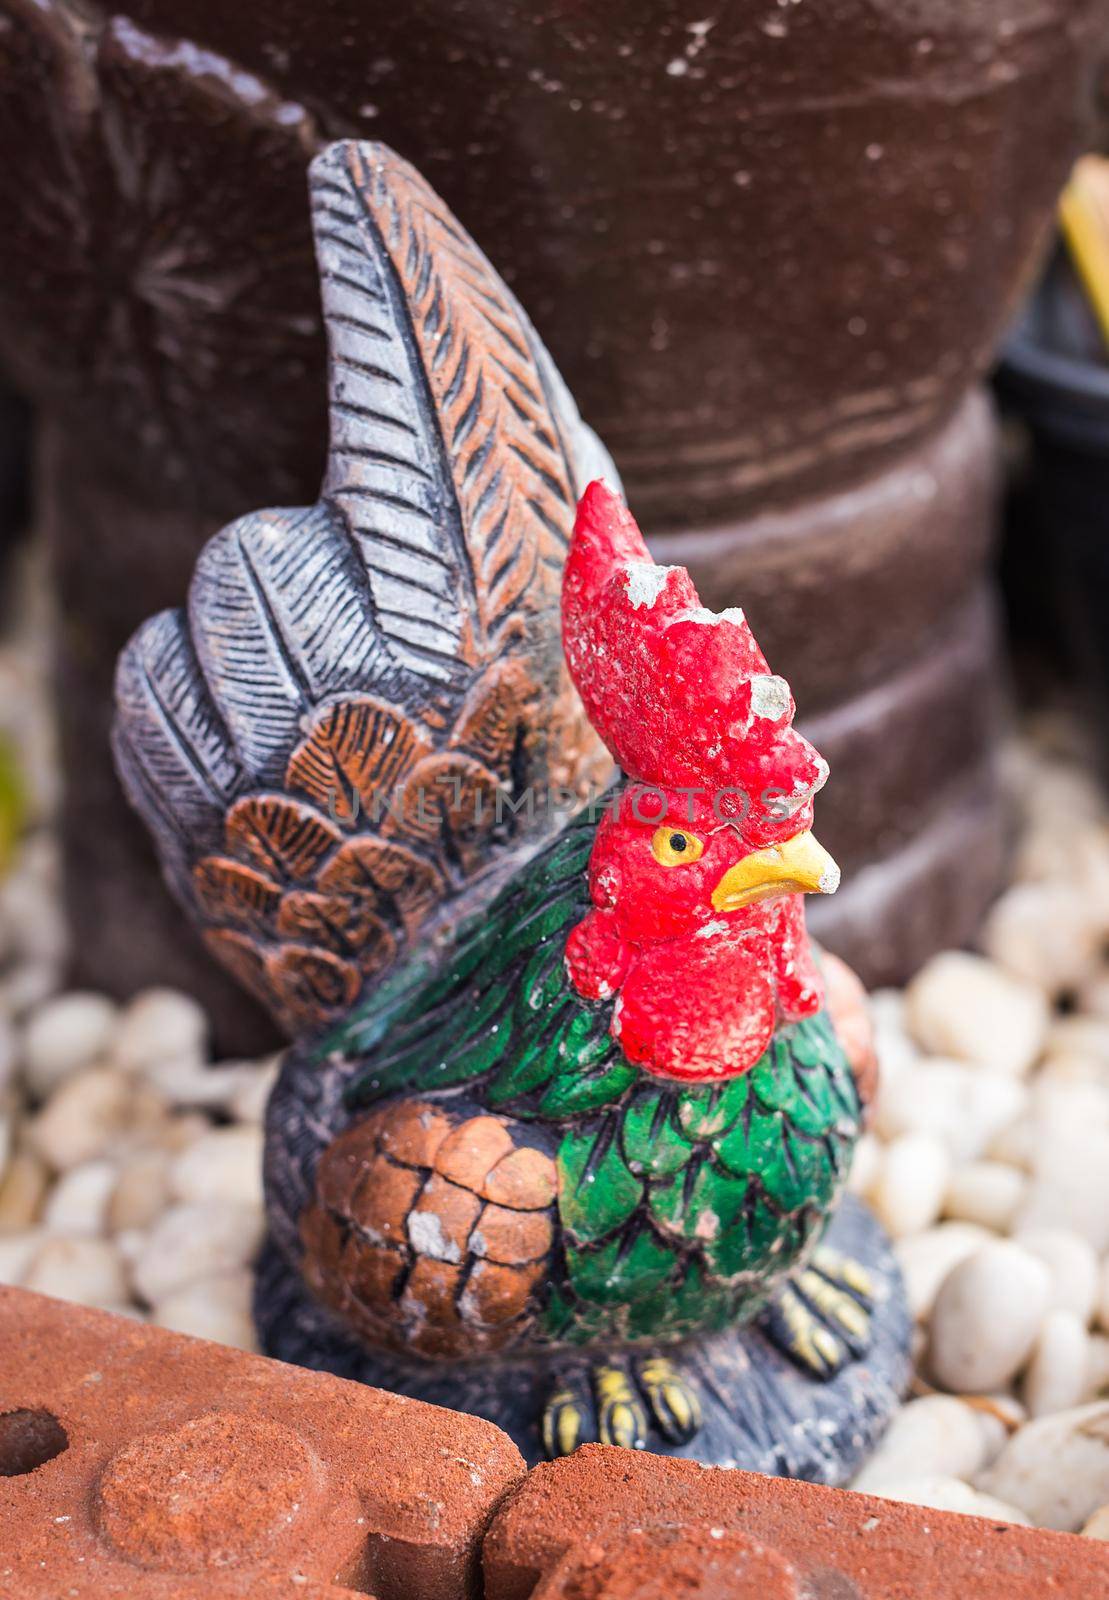 Rooster Figurine outdoors by Satura86